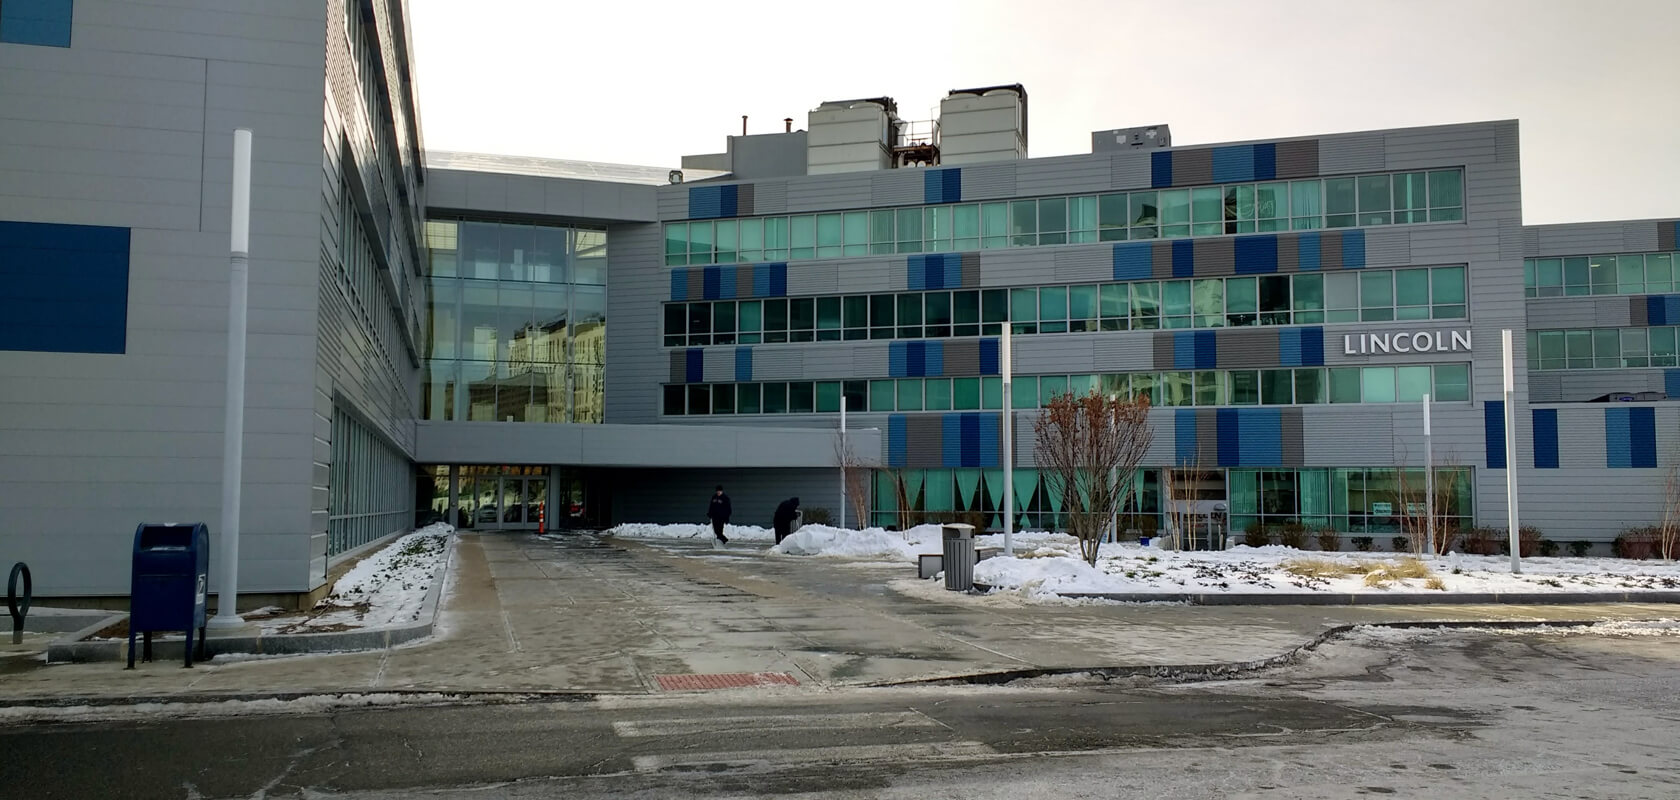 The Lincoln Technical Institute where PYD's offices are located